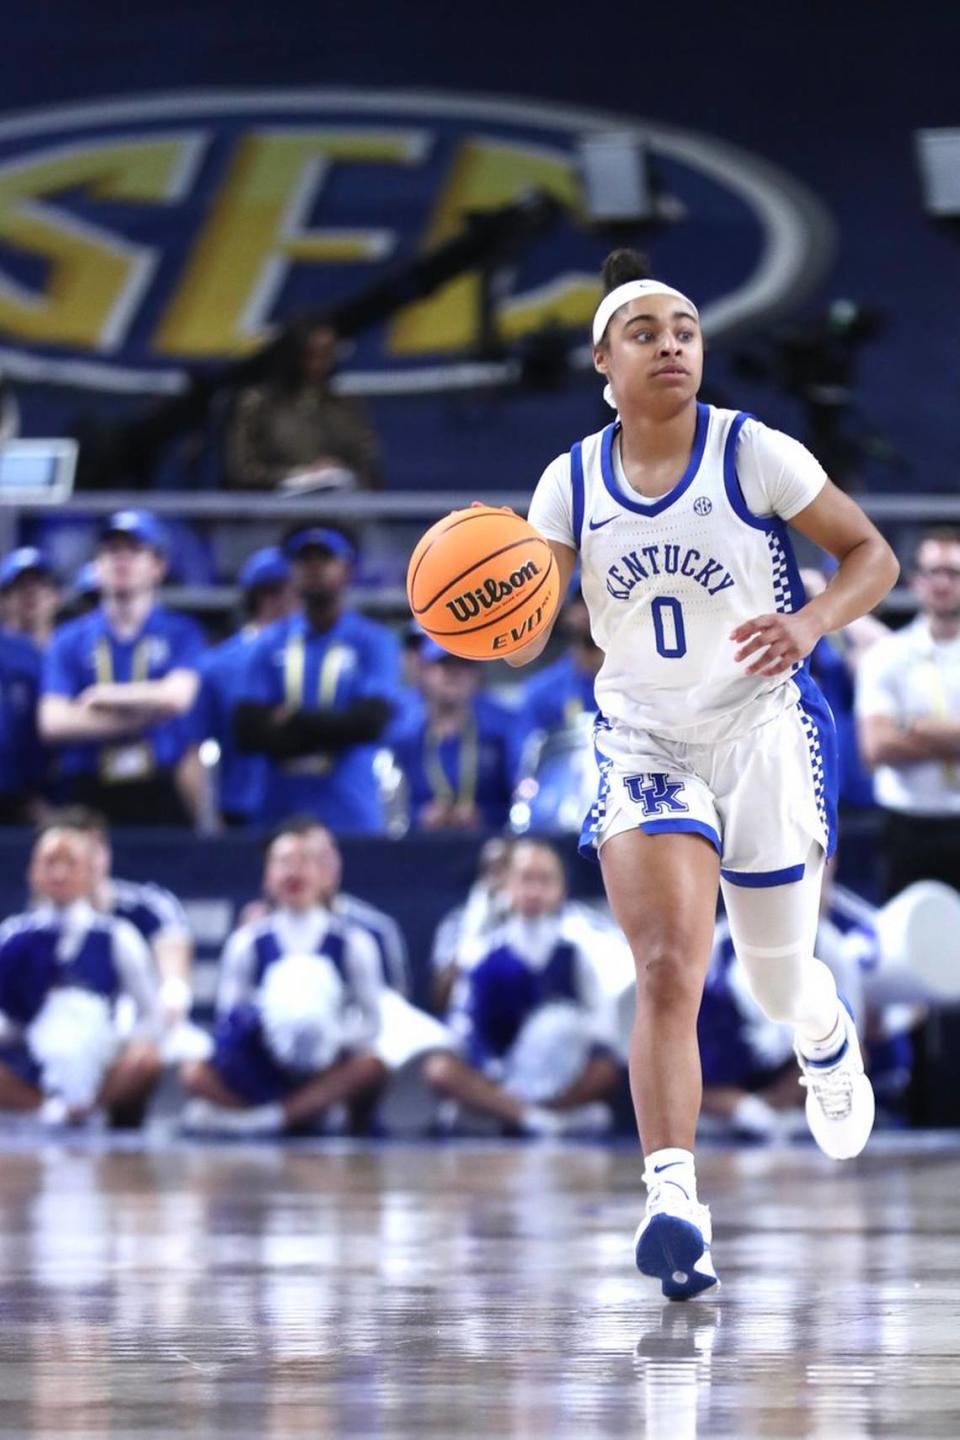 During her one season at Kentucky, Brooklynn Miles averaged 5.8 points, 2.8 rebounds, 3.0 assists and 1.2 steals in 29.8 minutes per game.